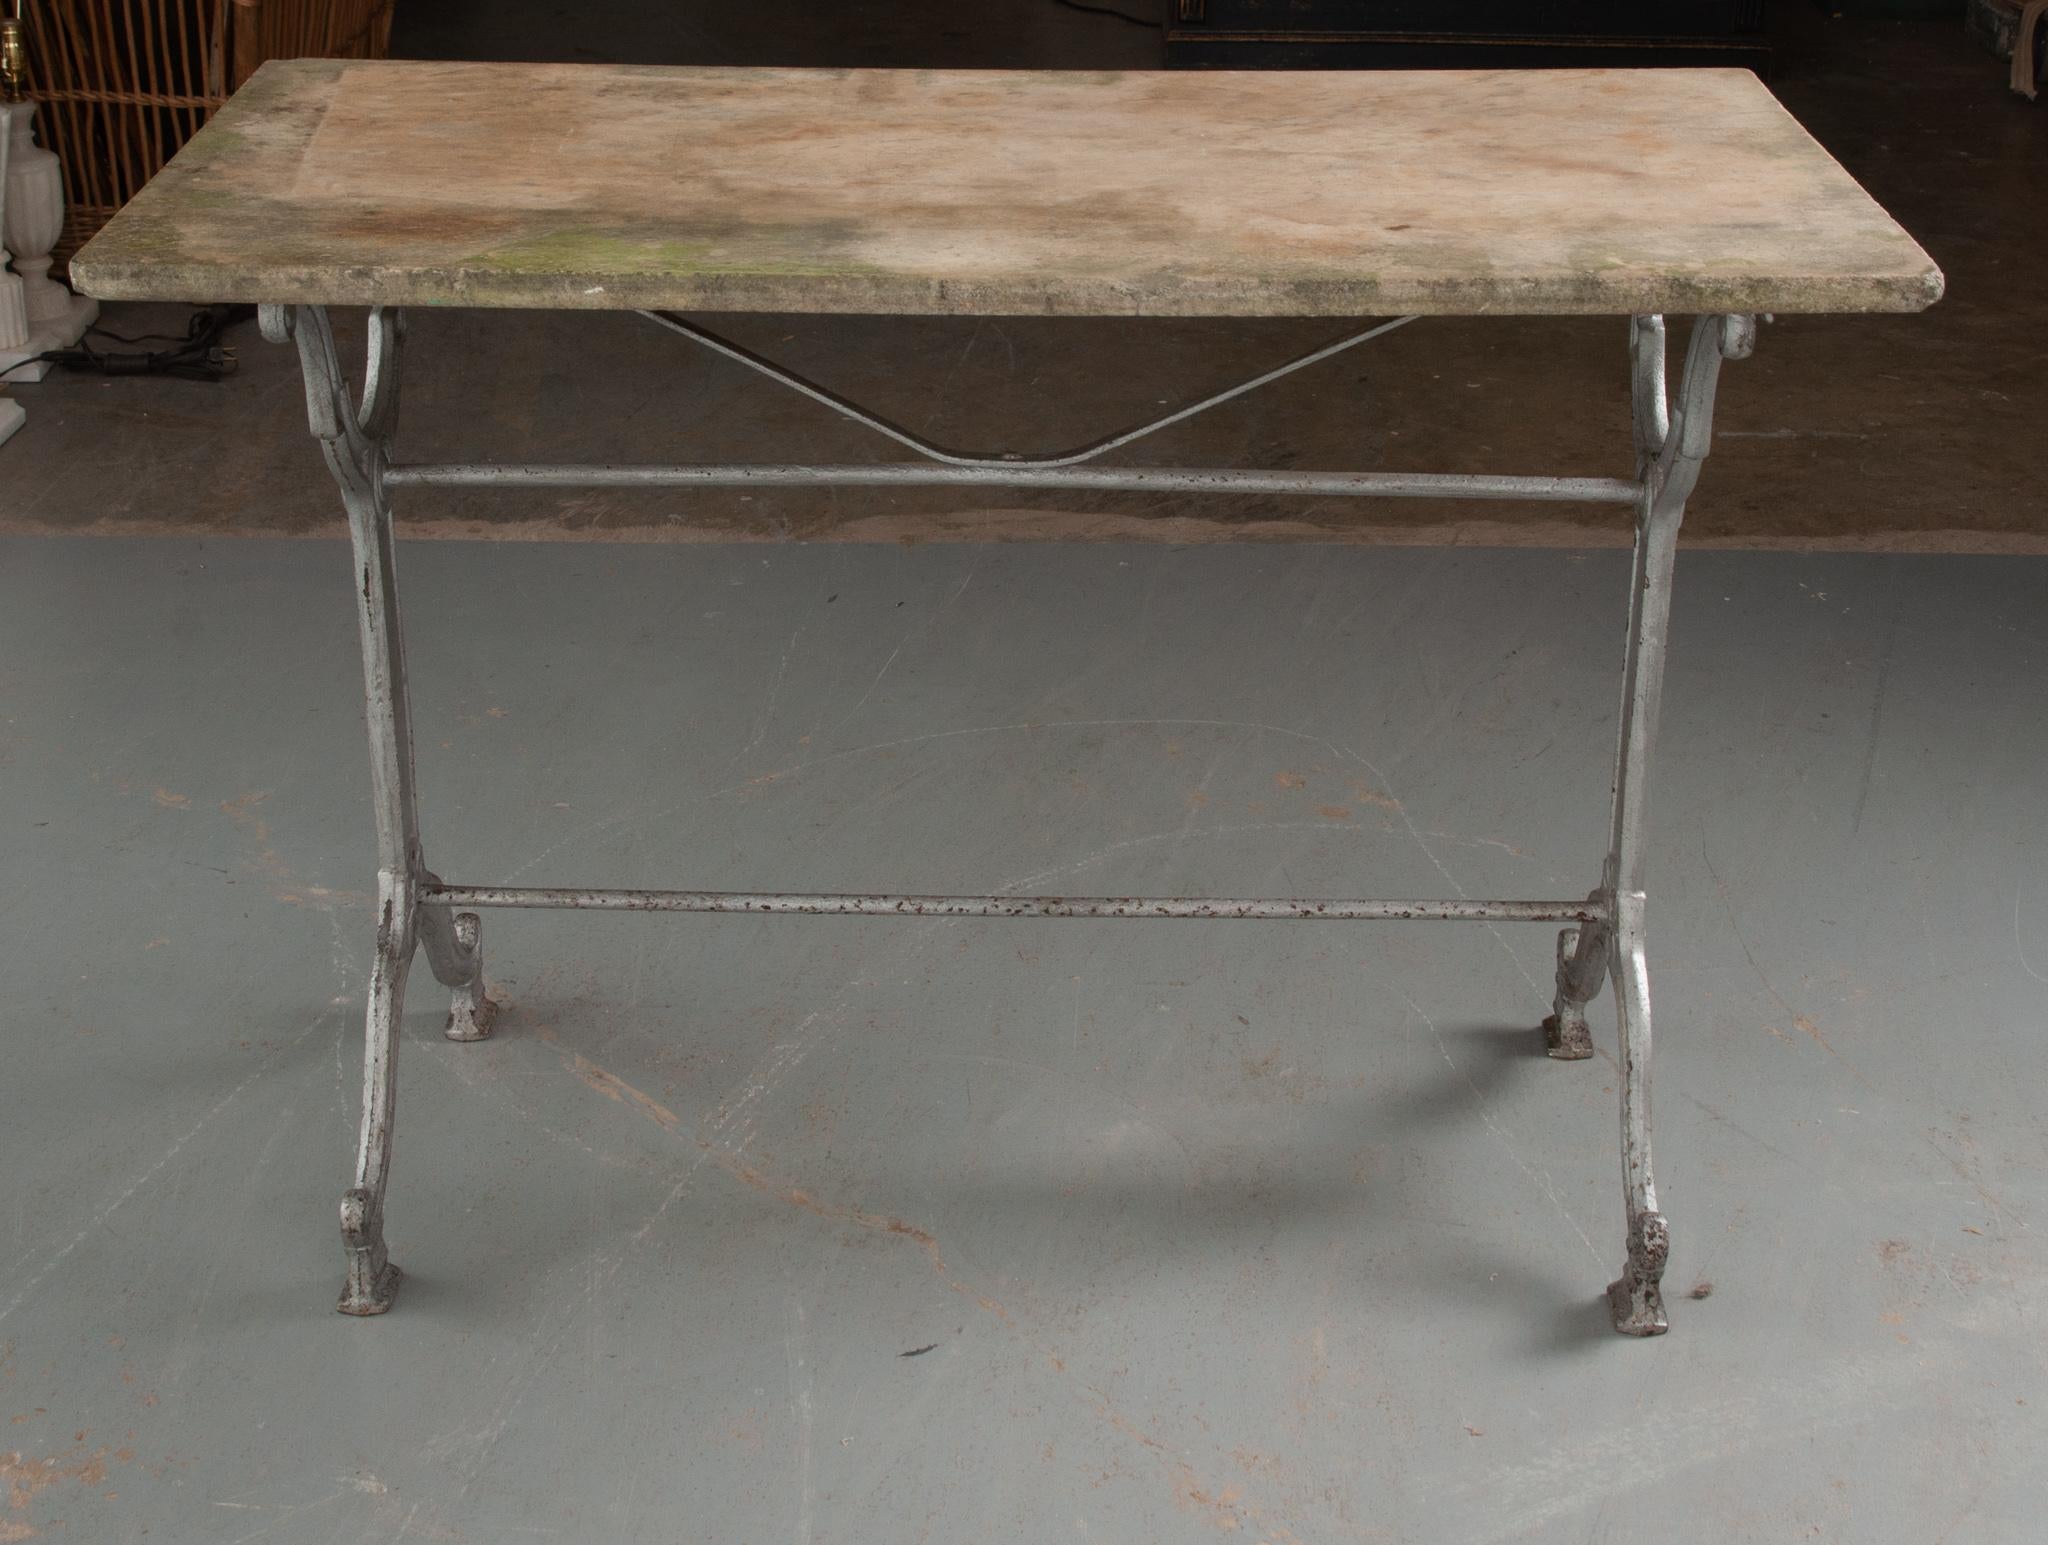 This rustic concrete top garden table was made in France. Weathered over the years, the top is in antique condition. The cast iron base is classically styled, with fashioned upright supports, linked by two iron stretcher braces. The worn iron